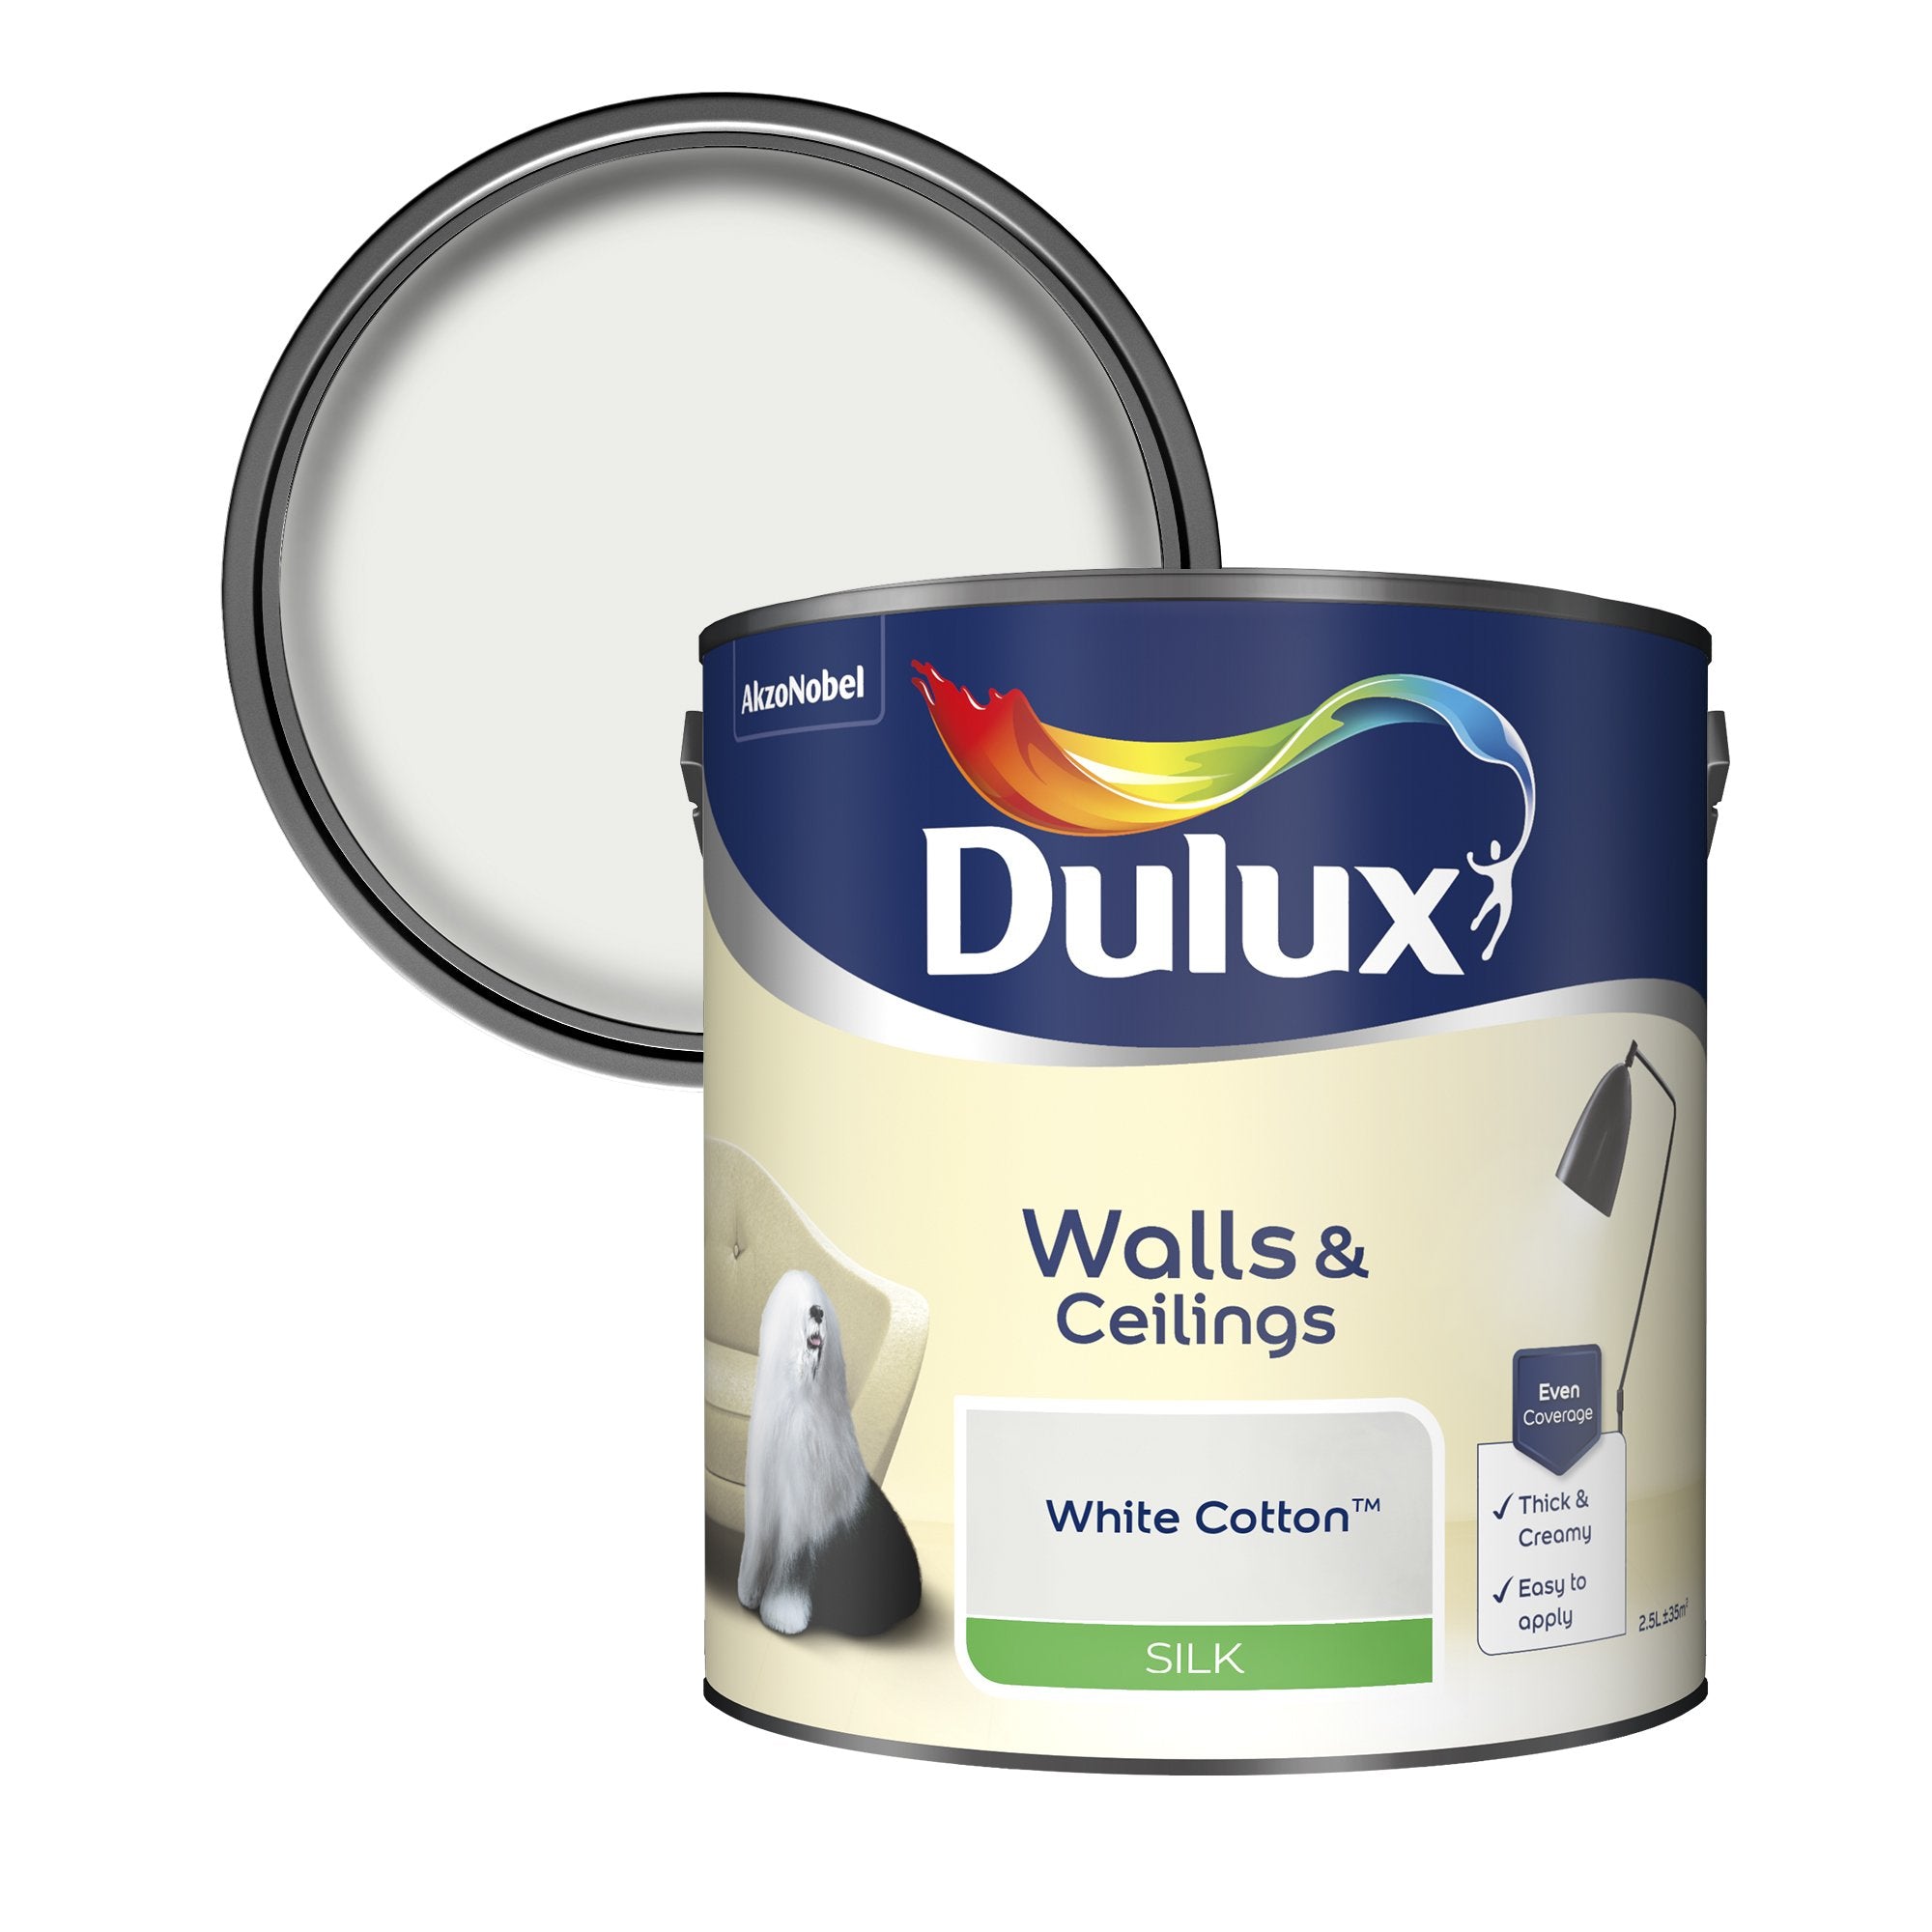 Dulux-Silk-Emulsion-Paint-For-Walls-And-Ceilings-White-Cotton-2.5L